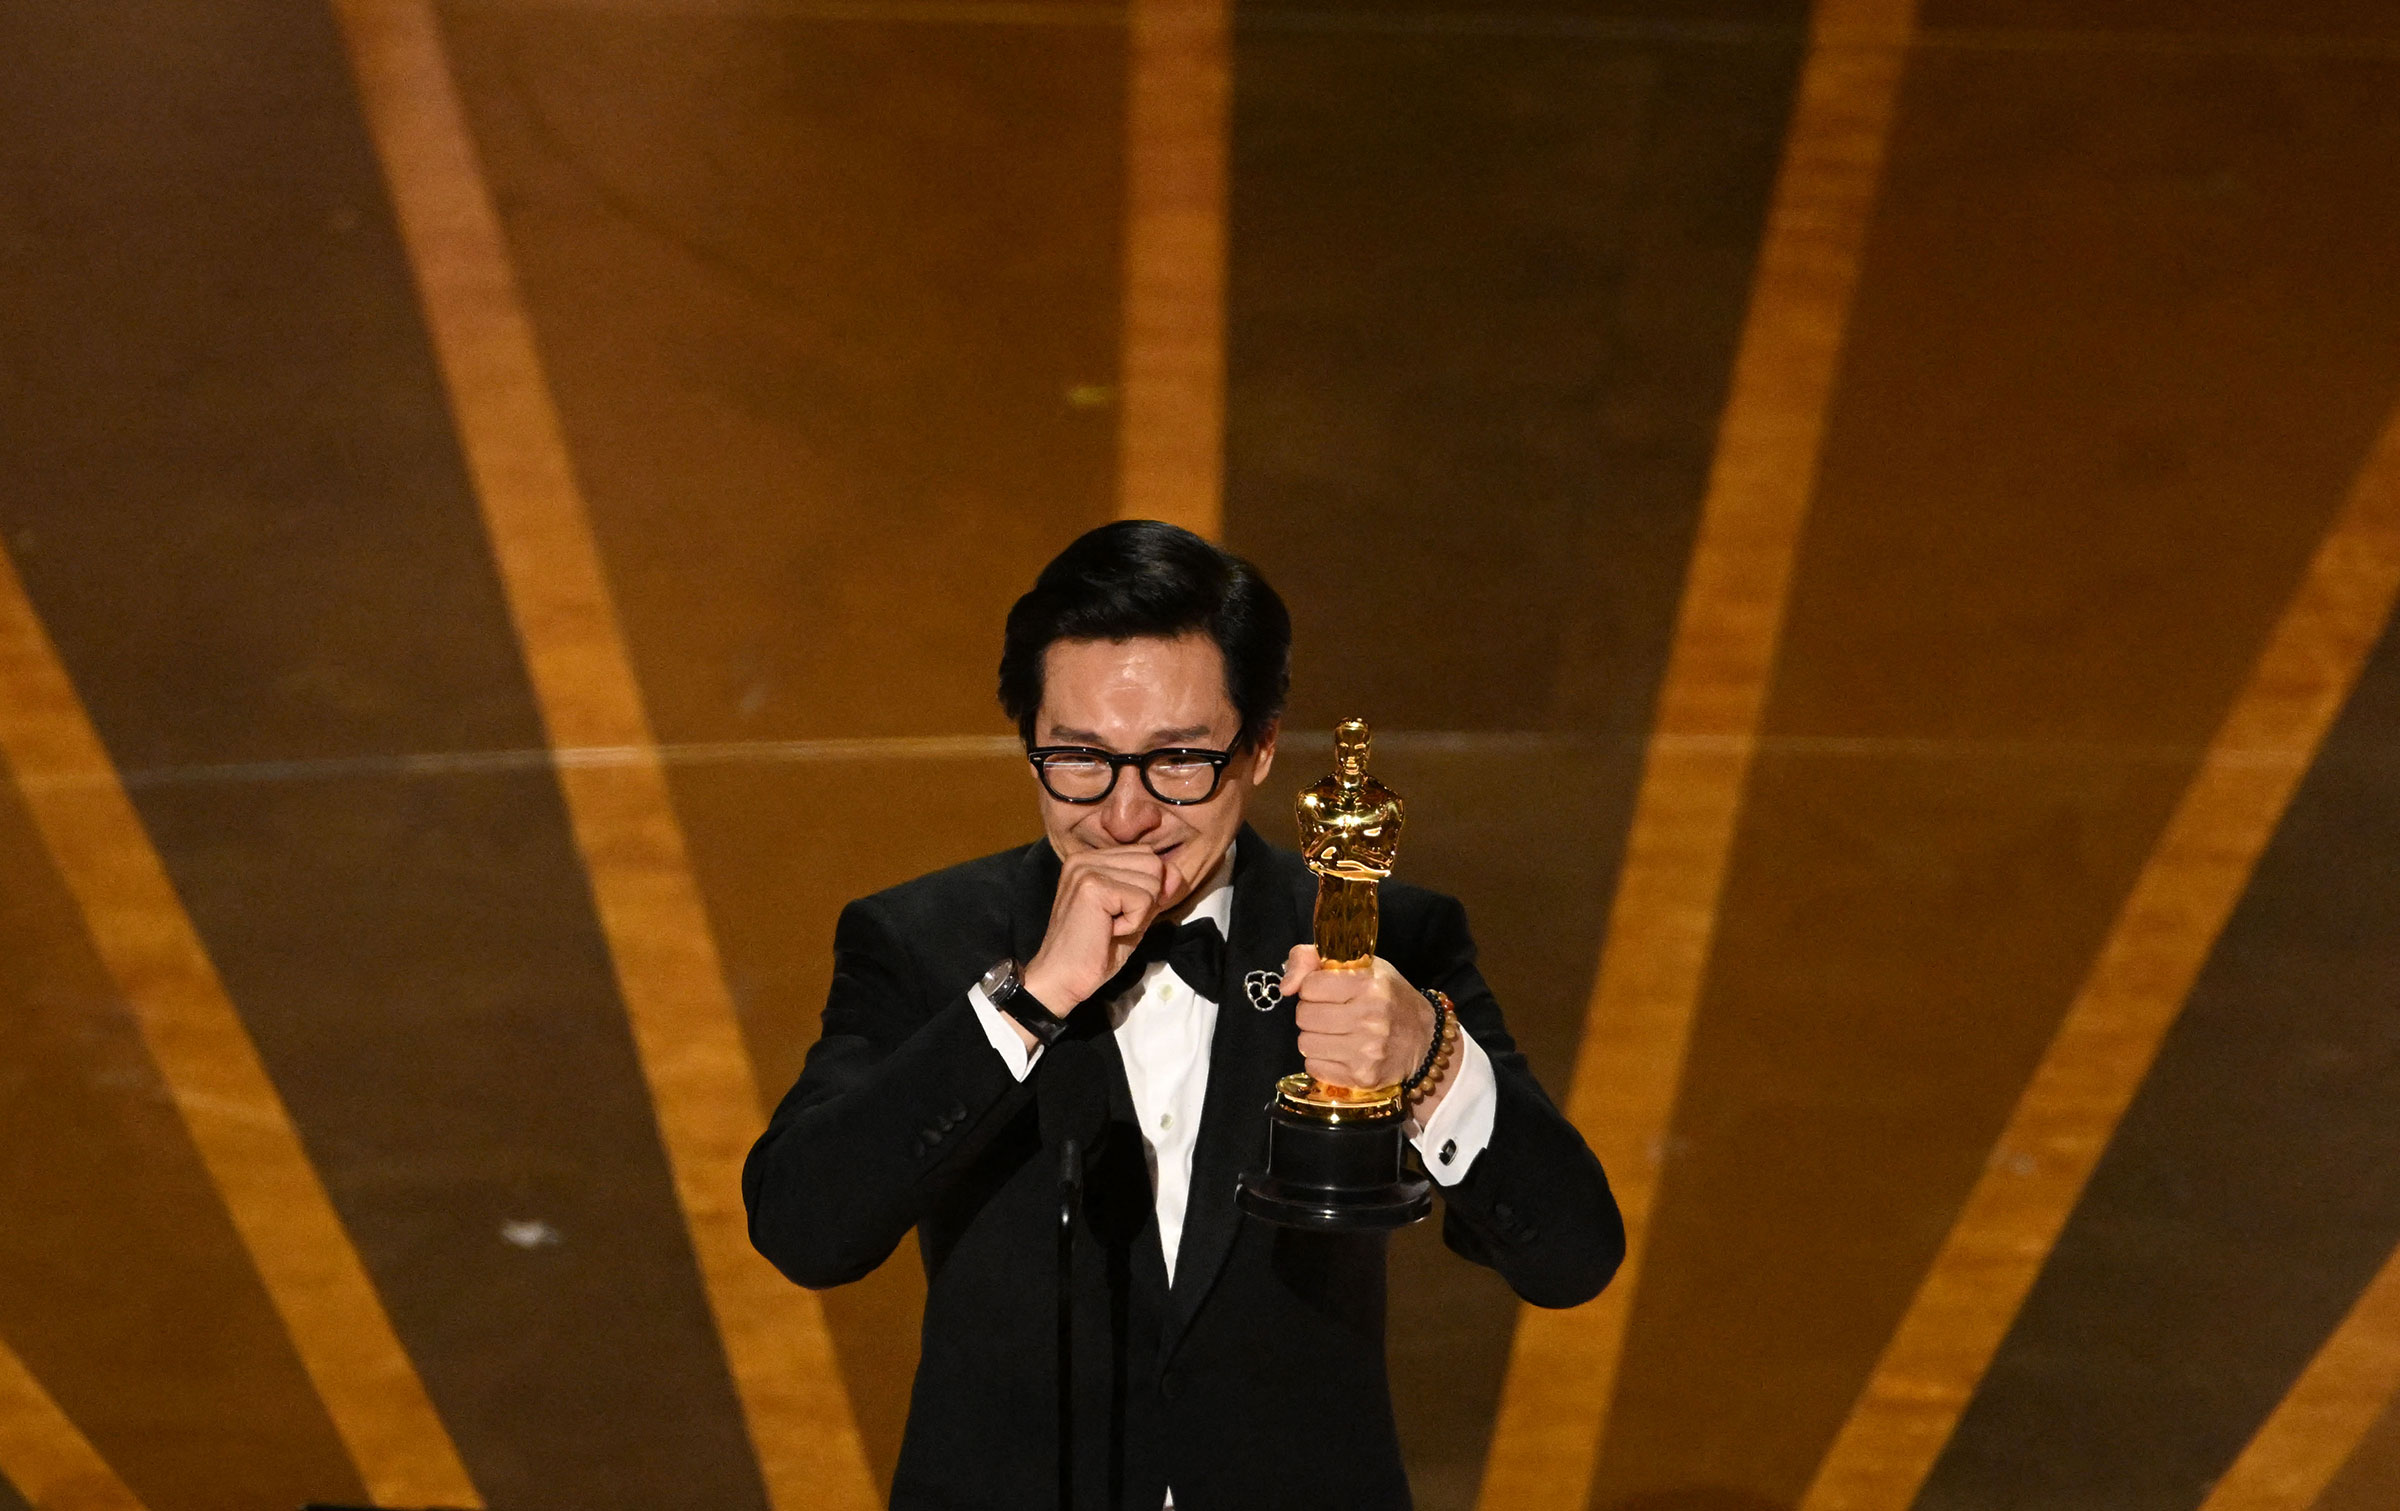 Ke Huy Quan accepts the Oscar for Best Actor in a Supporting Role for "Everything Everywhere All at Once" onstage during the 95th Annual Academy Awards.